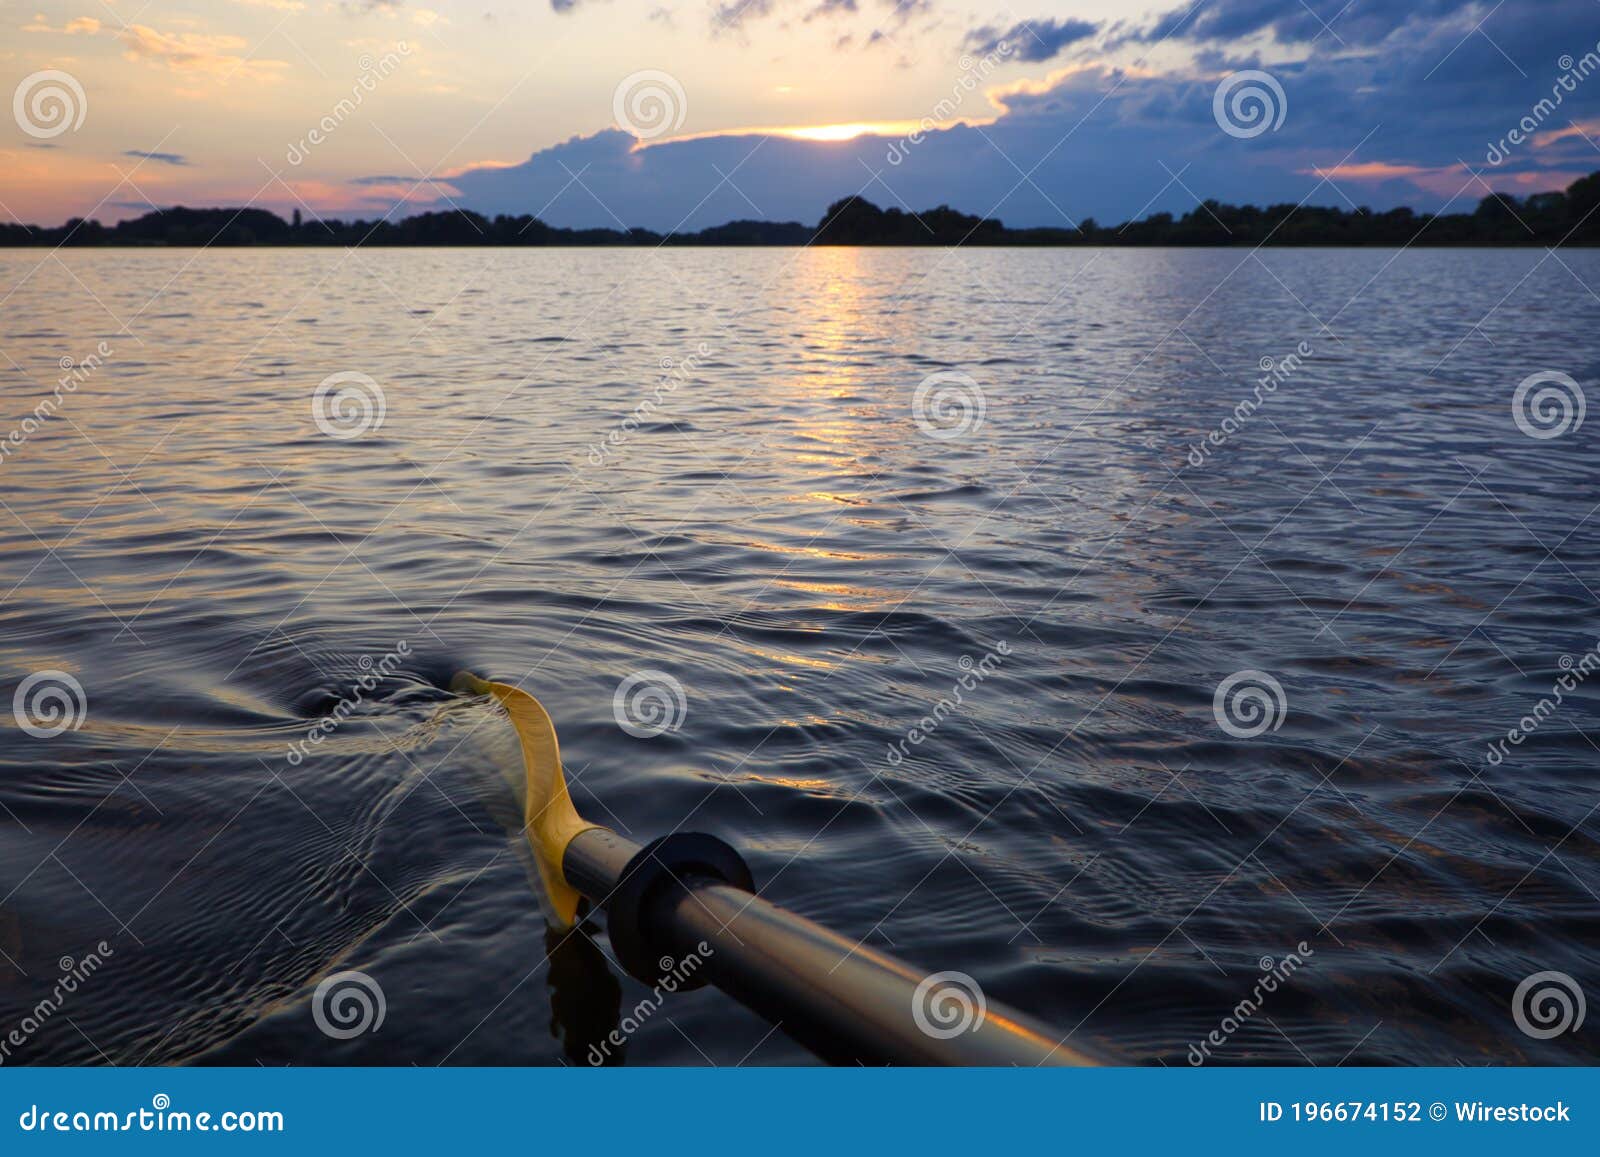 kayak paddle in a beautiful sunset on small ploner lake with dramatic clouds, plon, ploen germany